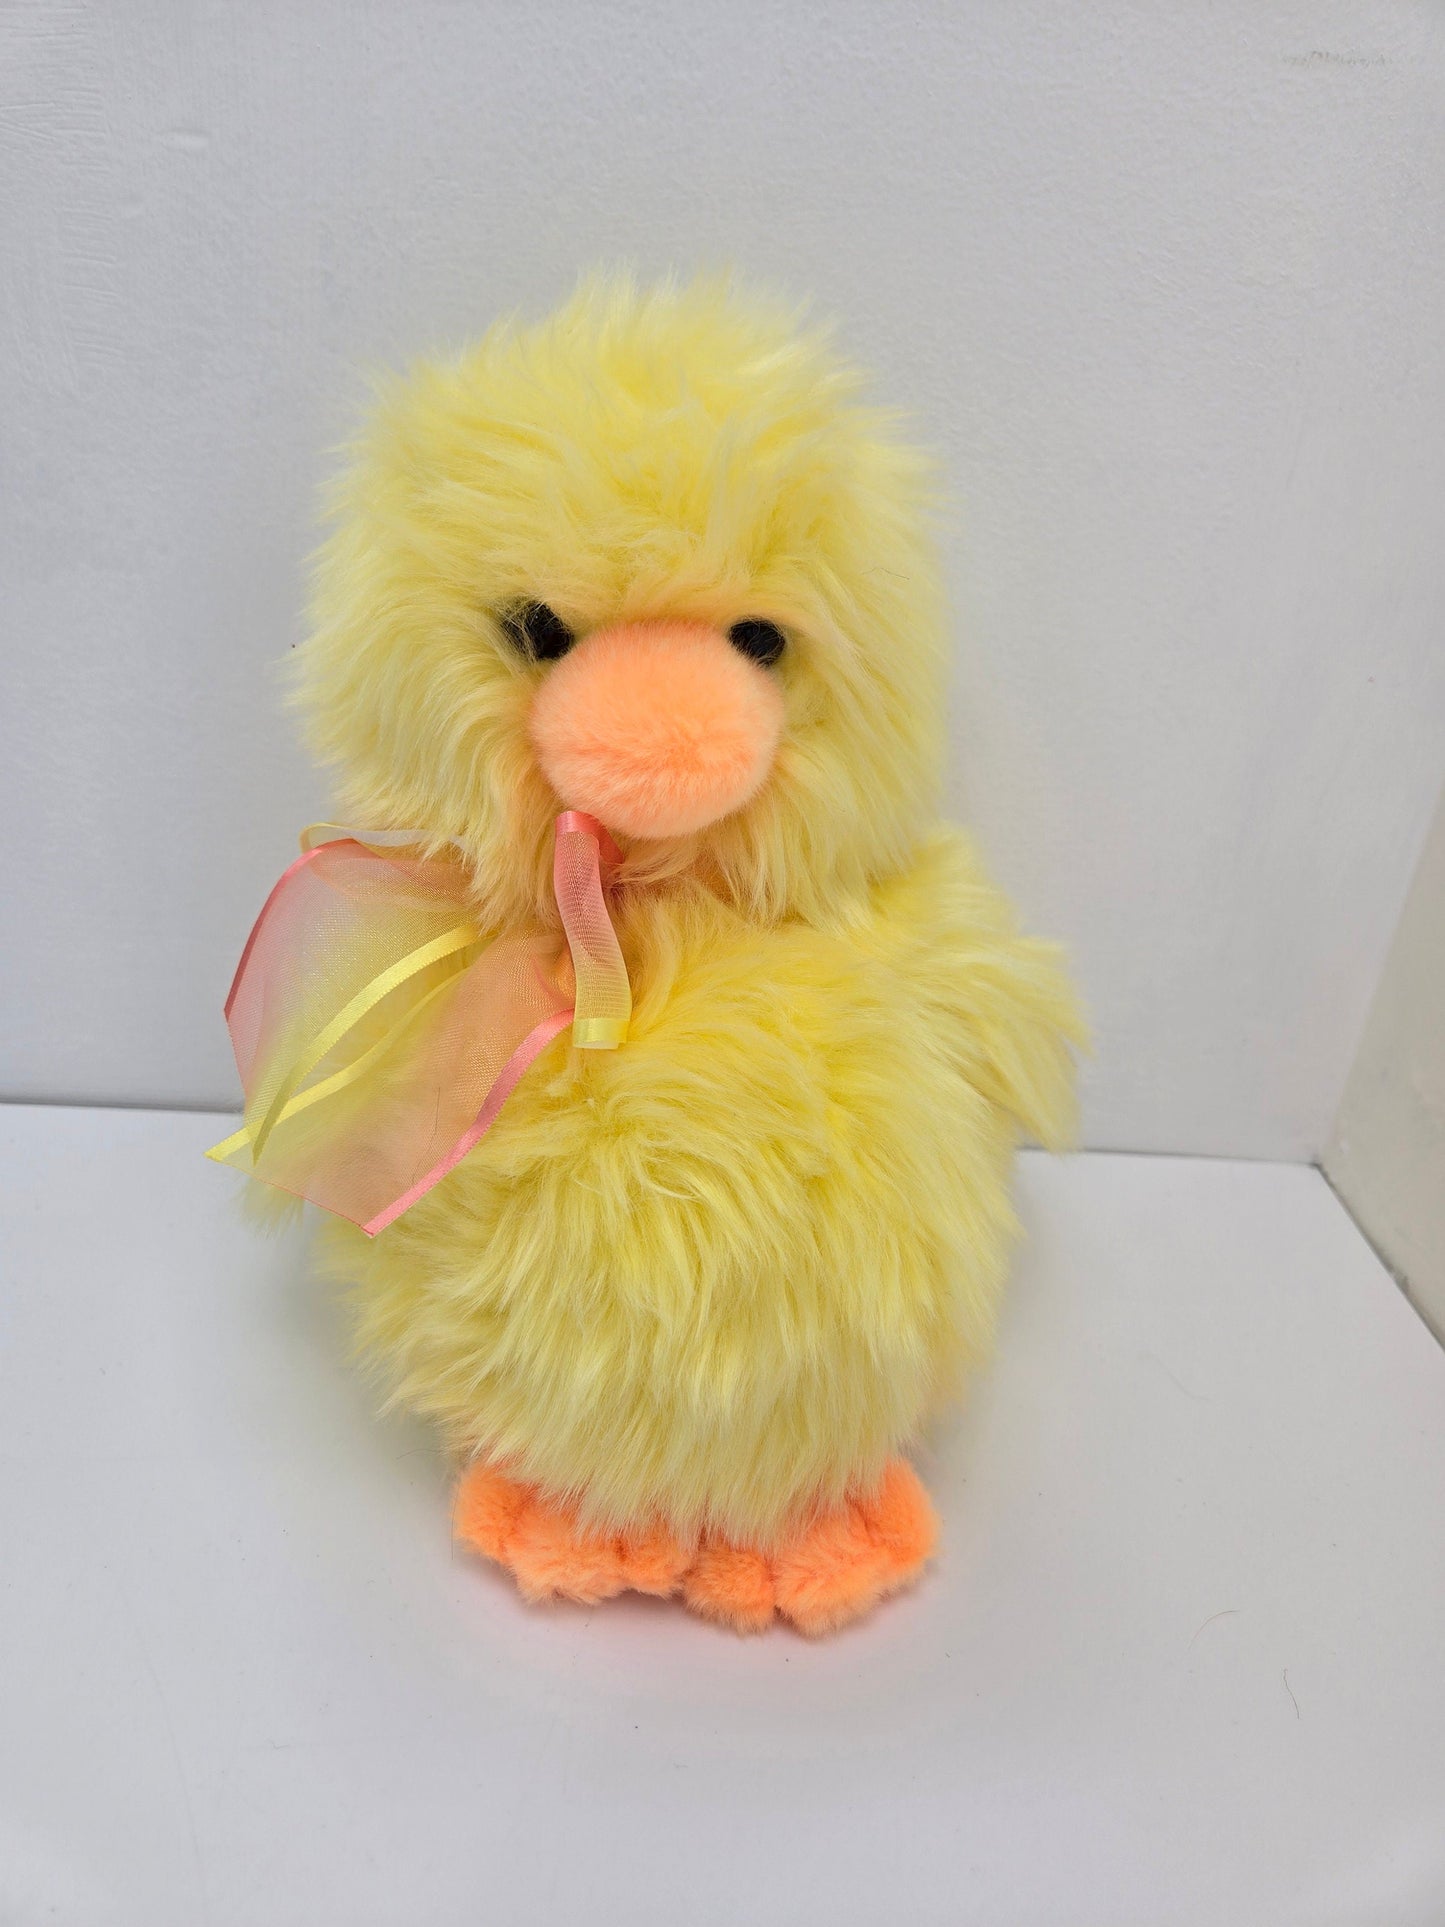 Ty Classics Collection “Billingsly” the Soft Fluffy Chick! (10 inch)